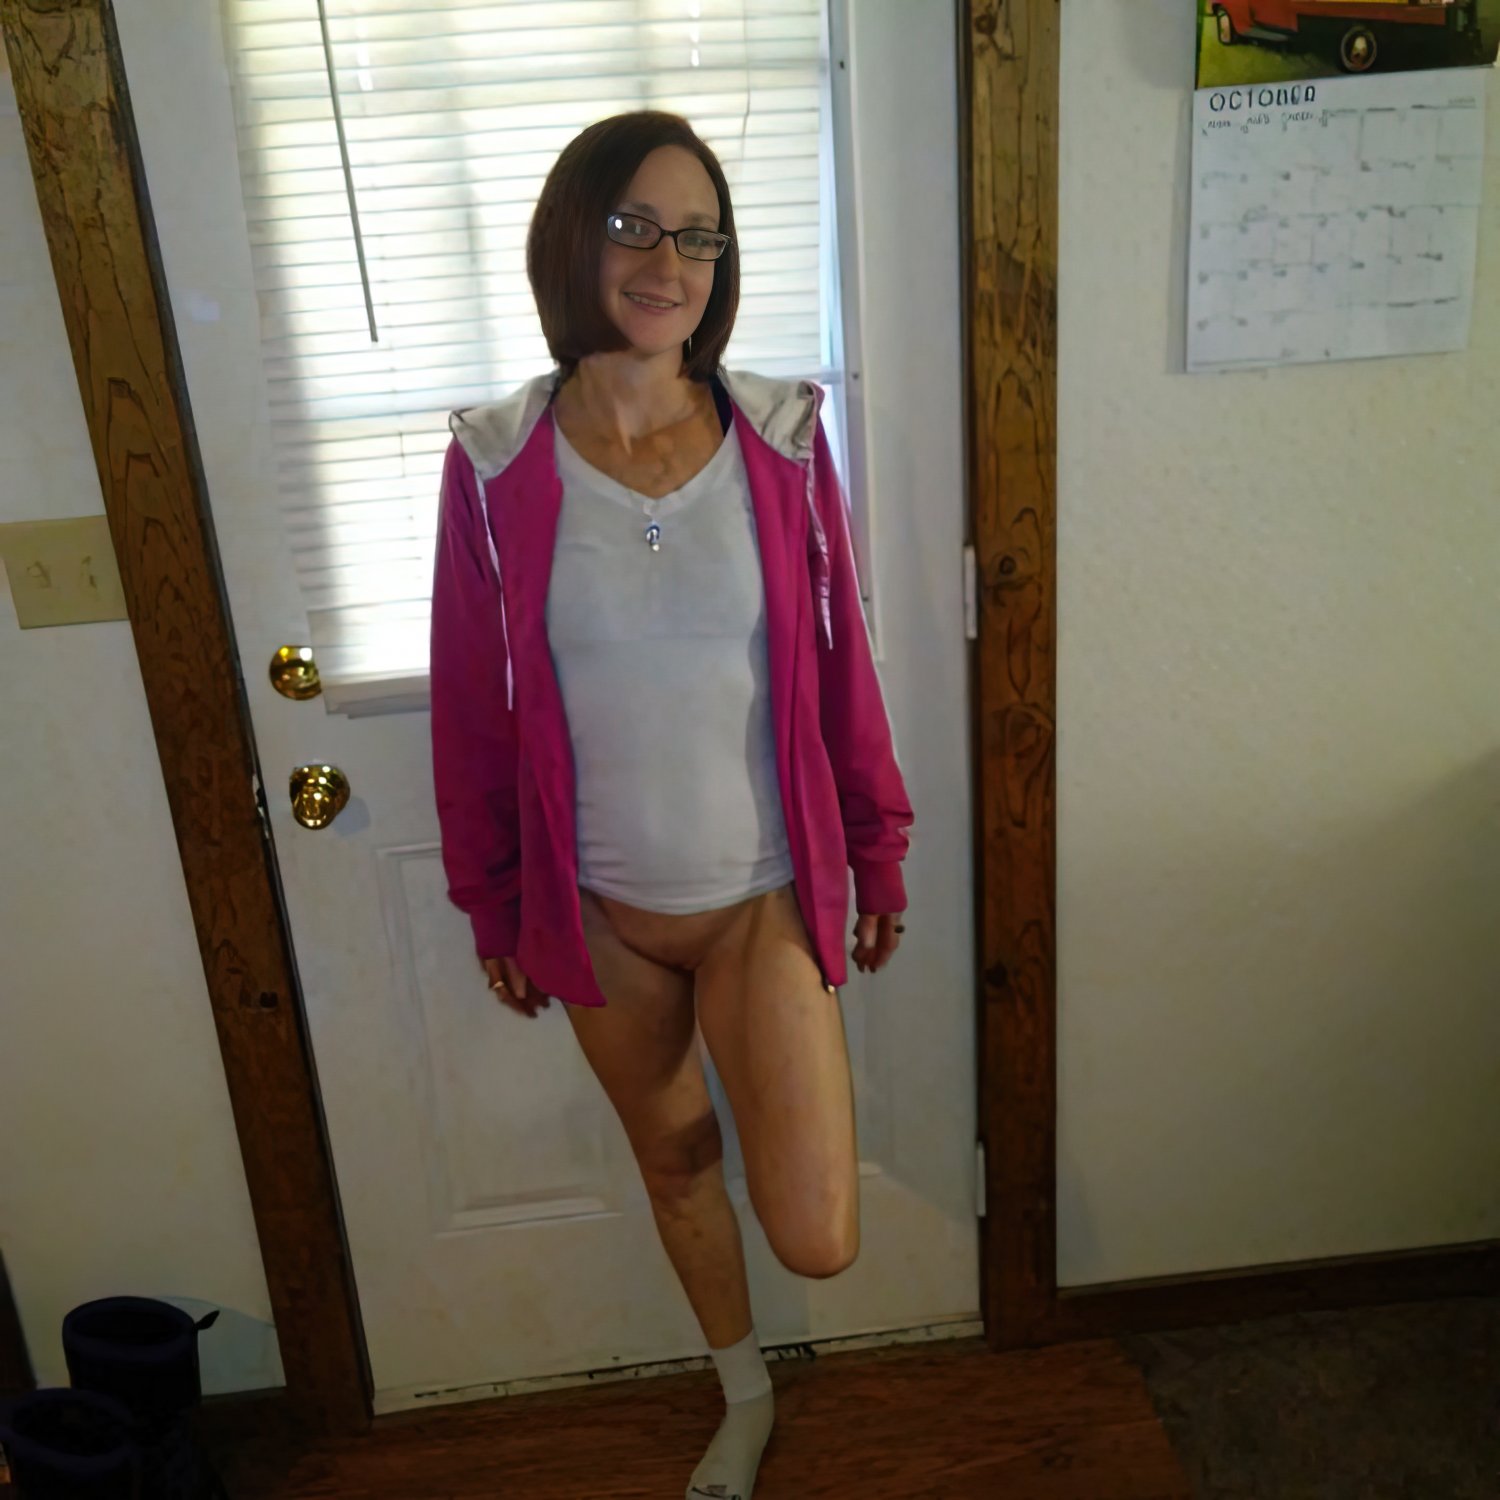 Hotwife Babydoll #franklin, KS, USA - Porn image picture